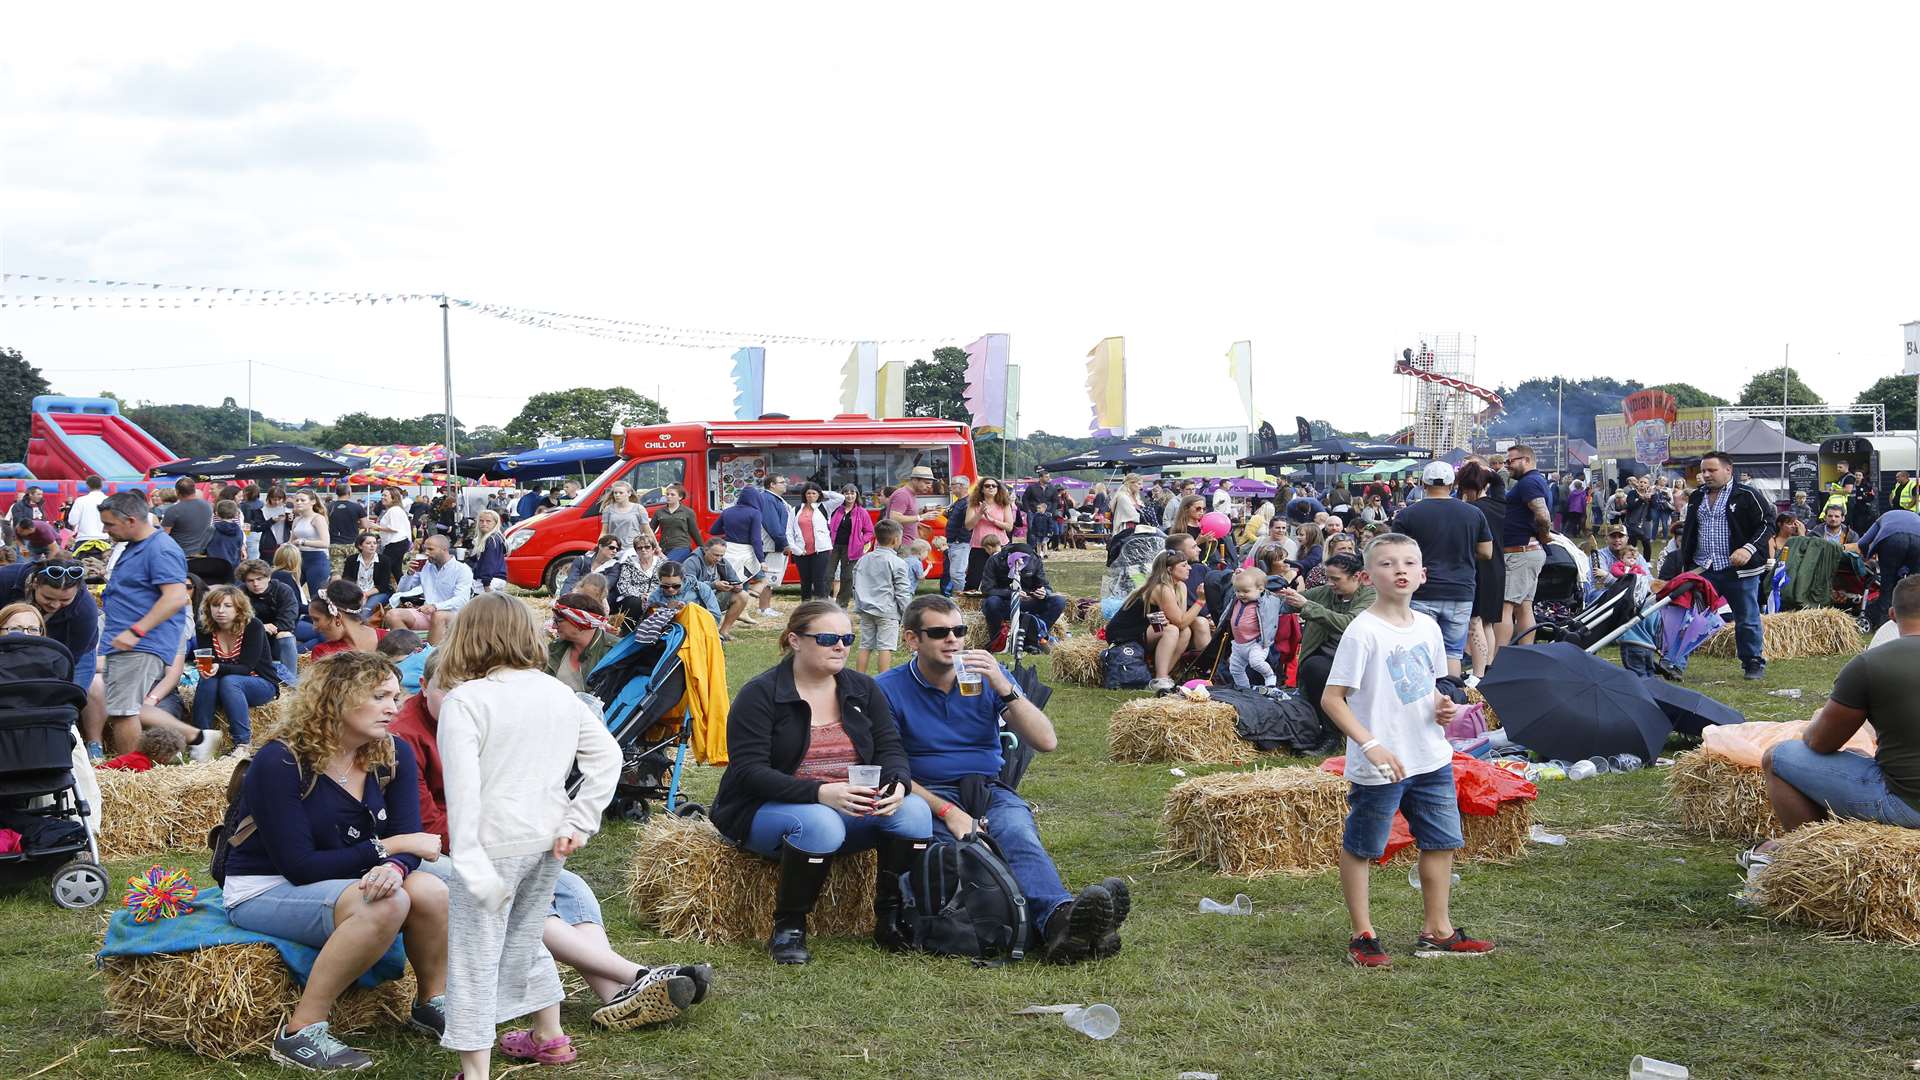 Thousands flocked to enjoy the Big Day Out music festival